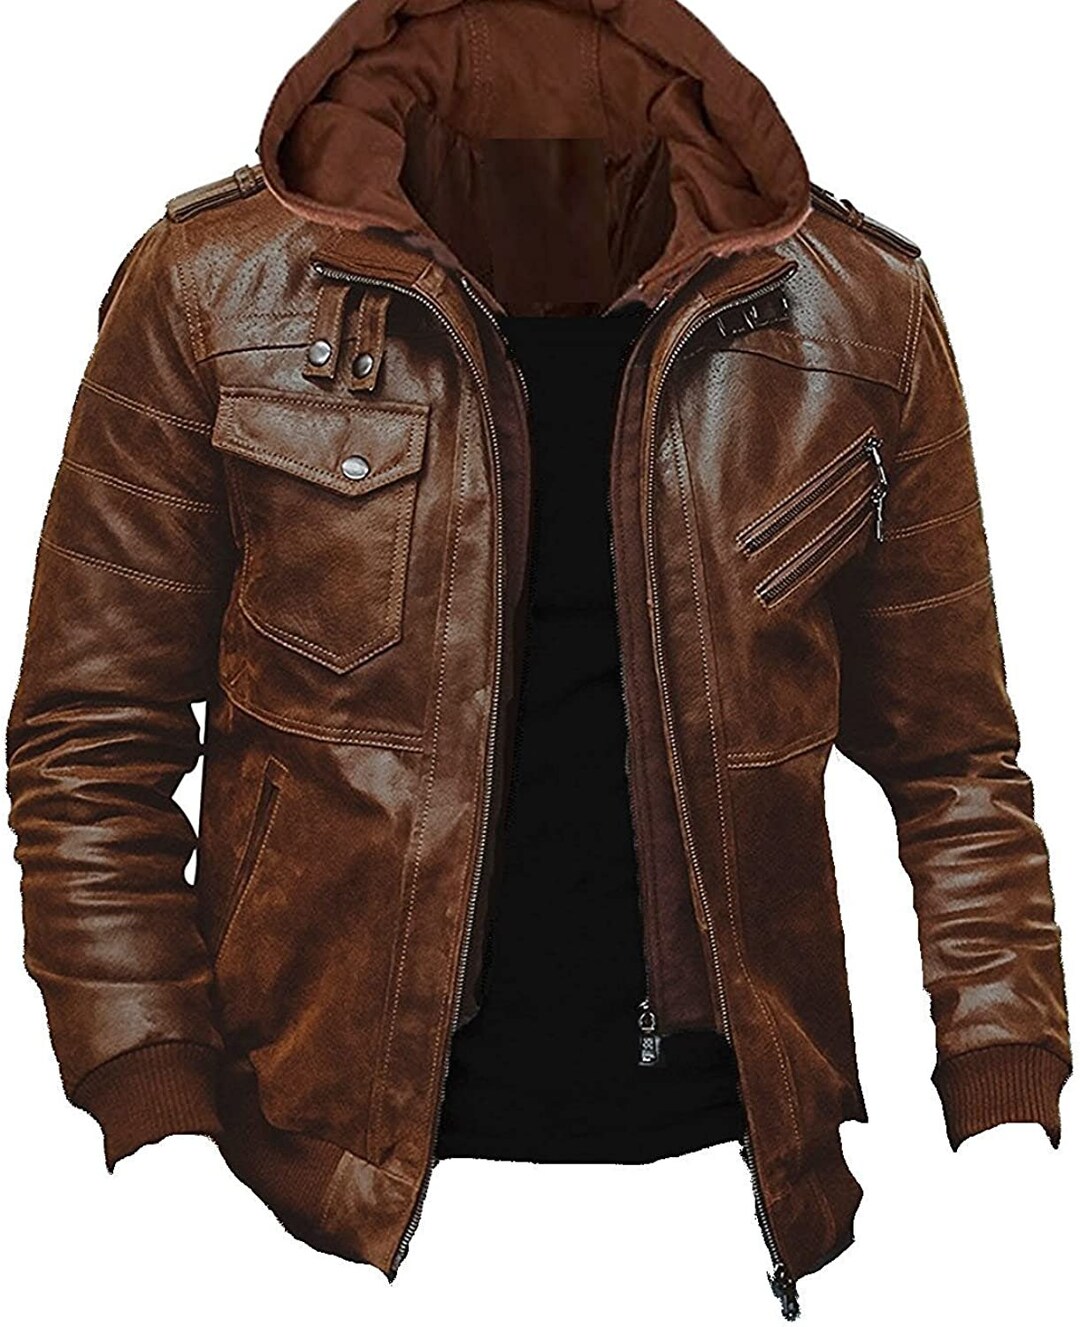 Genuine Sheep Leather Jacket for Men, Choclate Brown Bomber, Winter ...